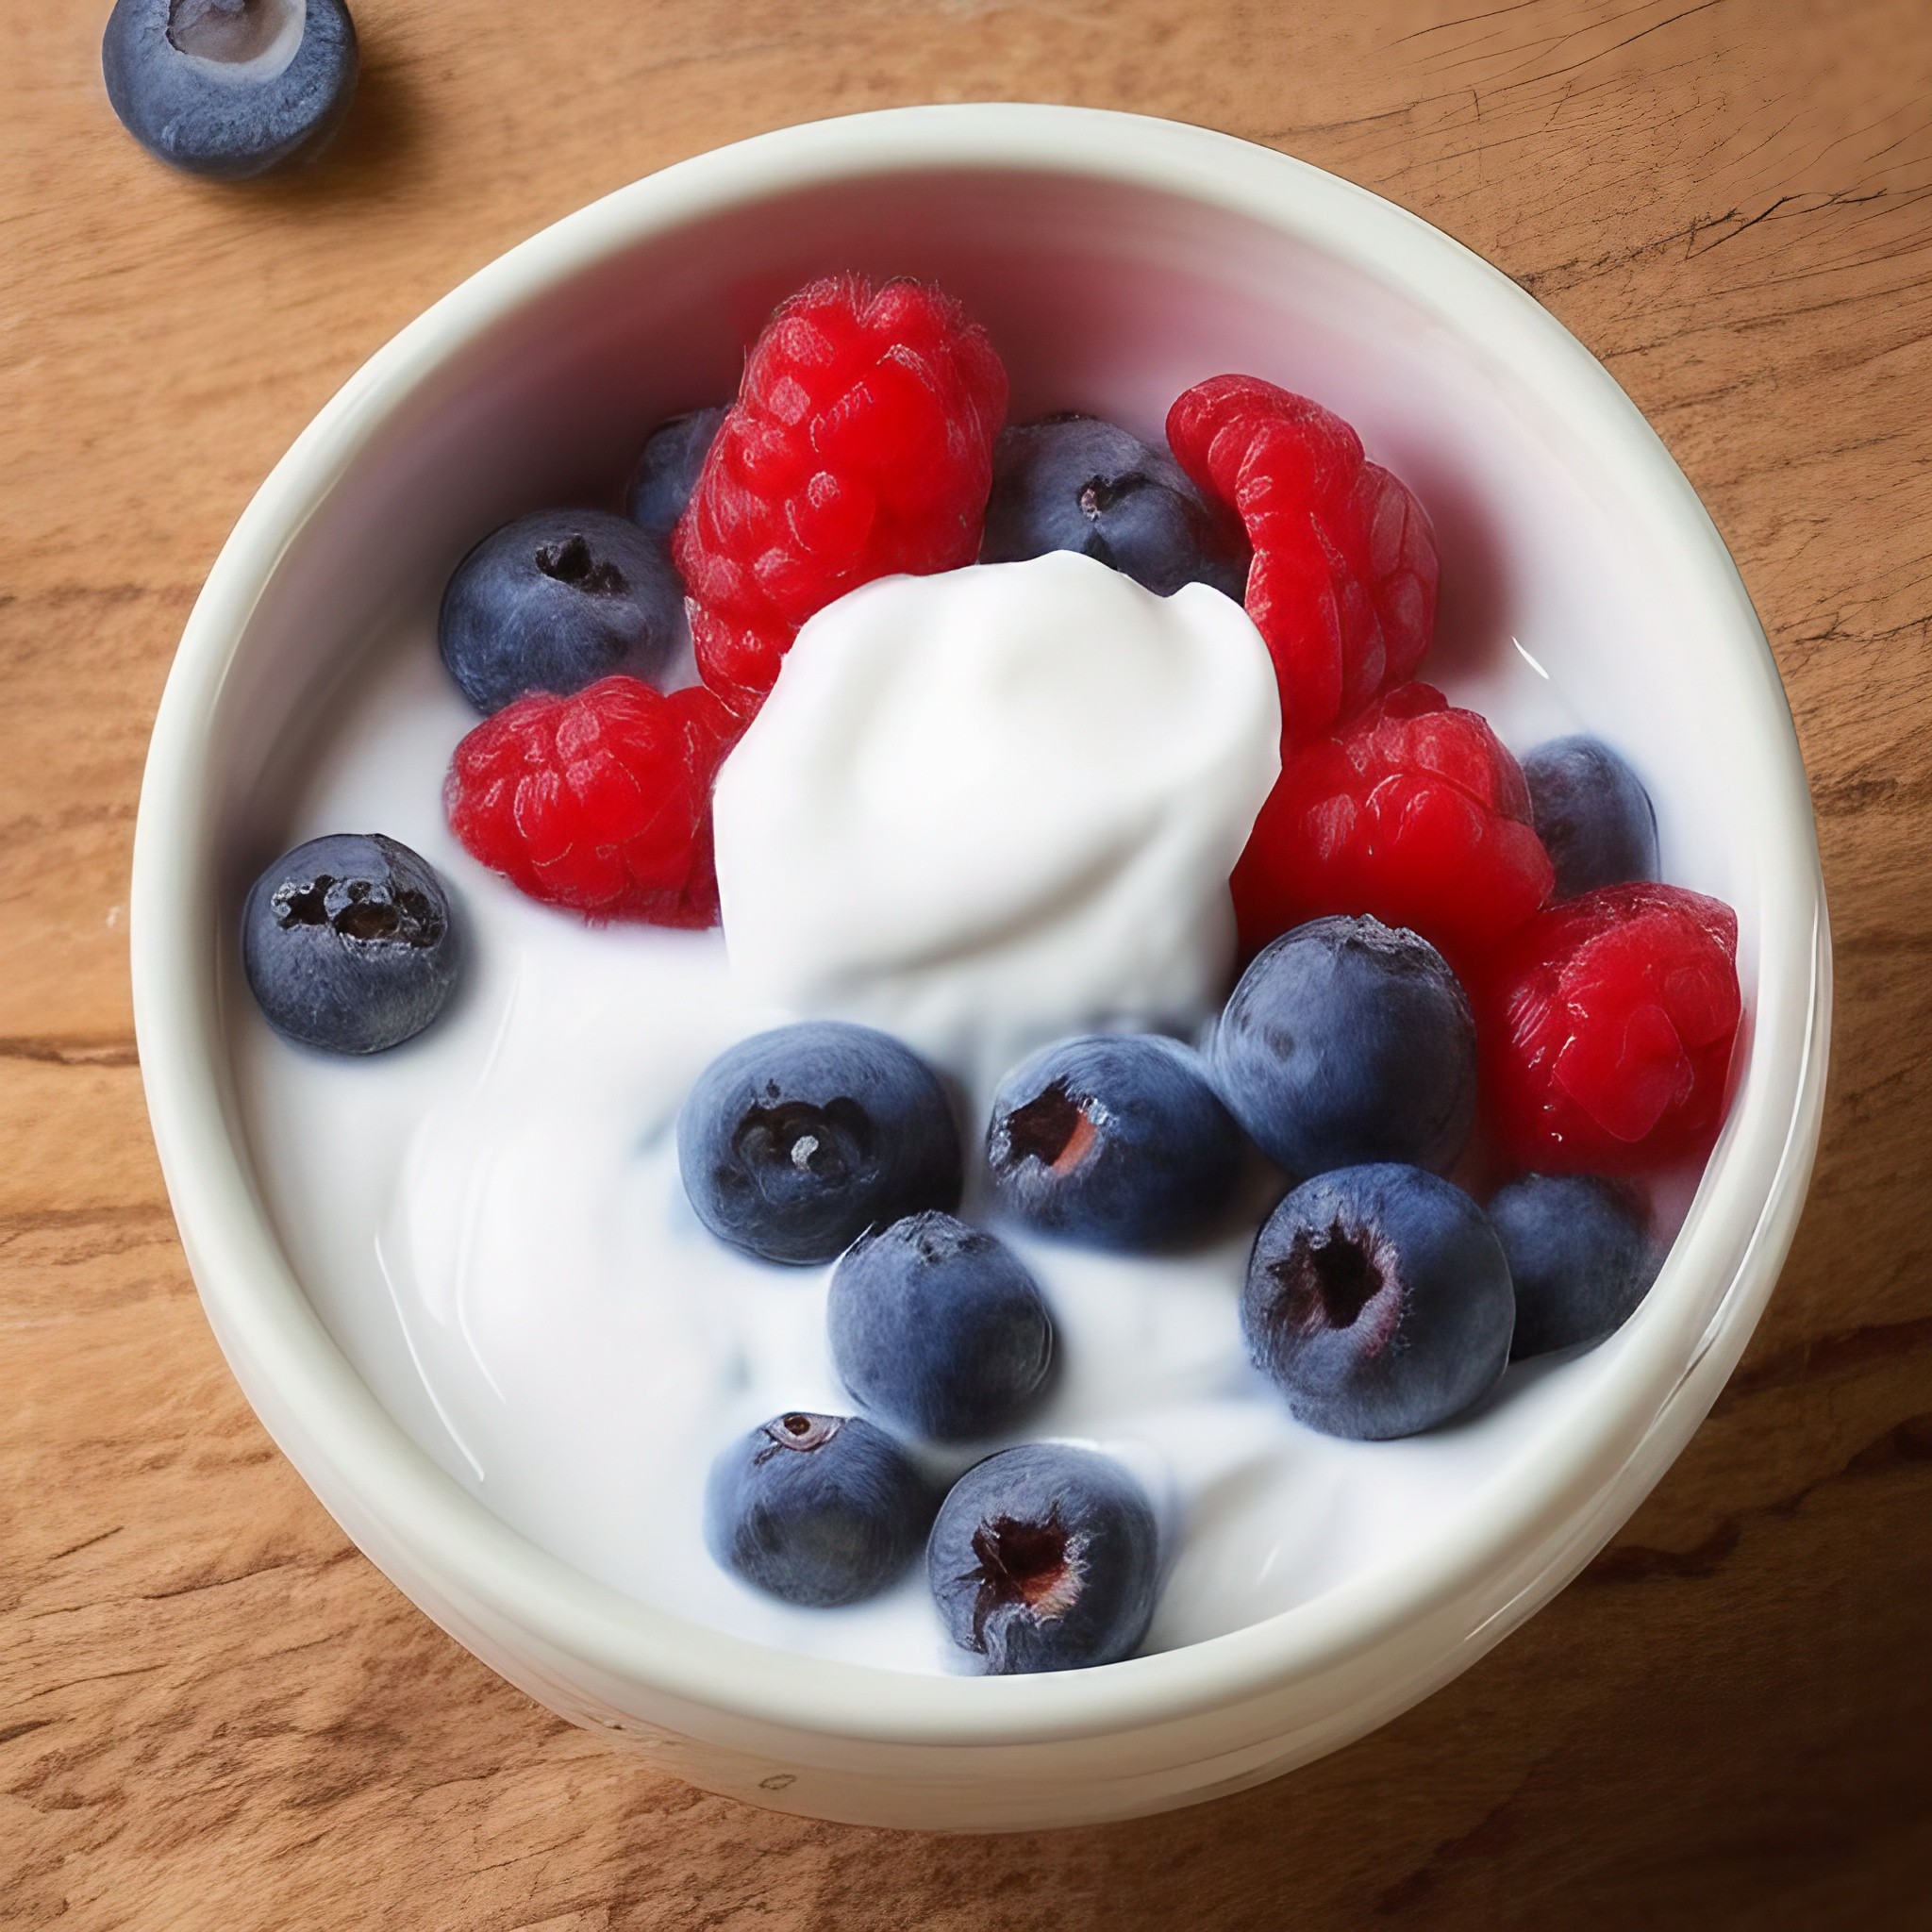 A white dish filled with creamy plain yogurt, colorful blueberries, and sweet raspberries